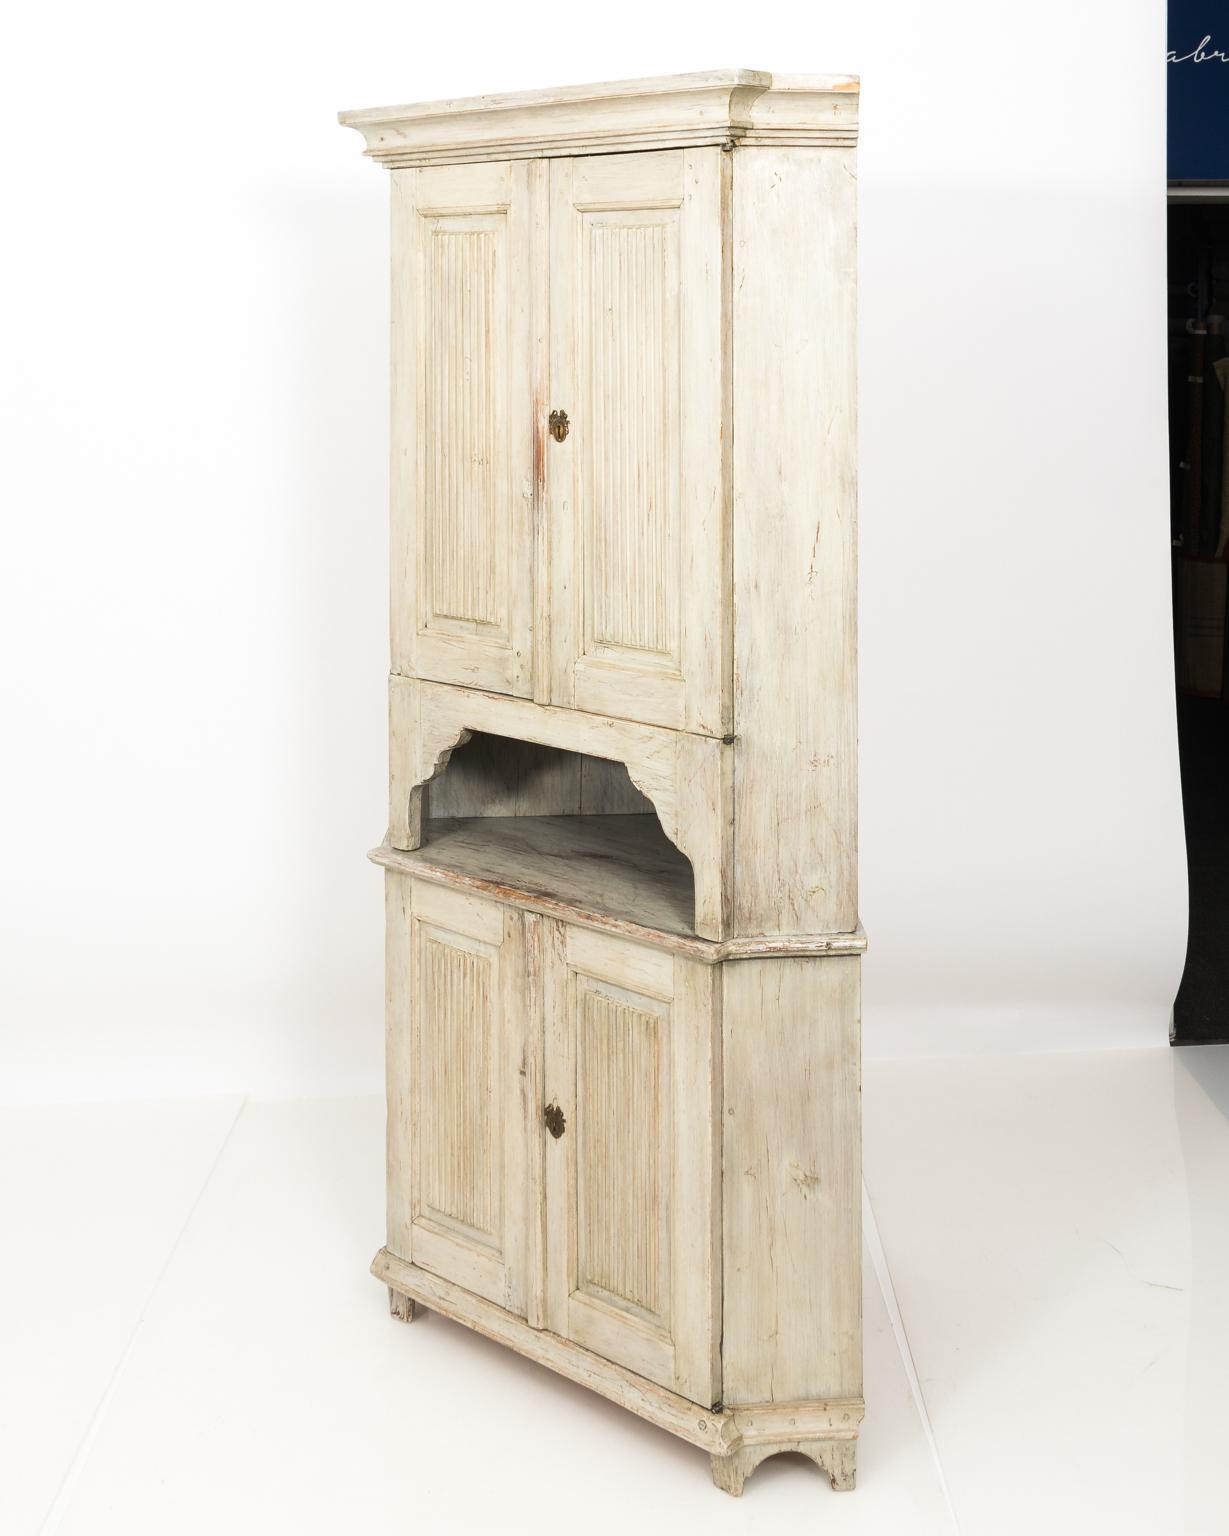 White painted Gustavian style corner cupboard with carved wood doors, ribbed panels, and brass escuctcheon, circa 1890-1920.
    